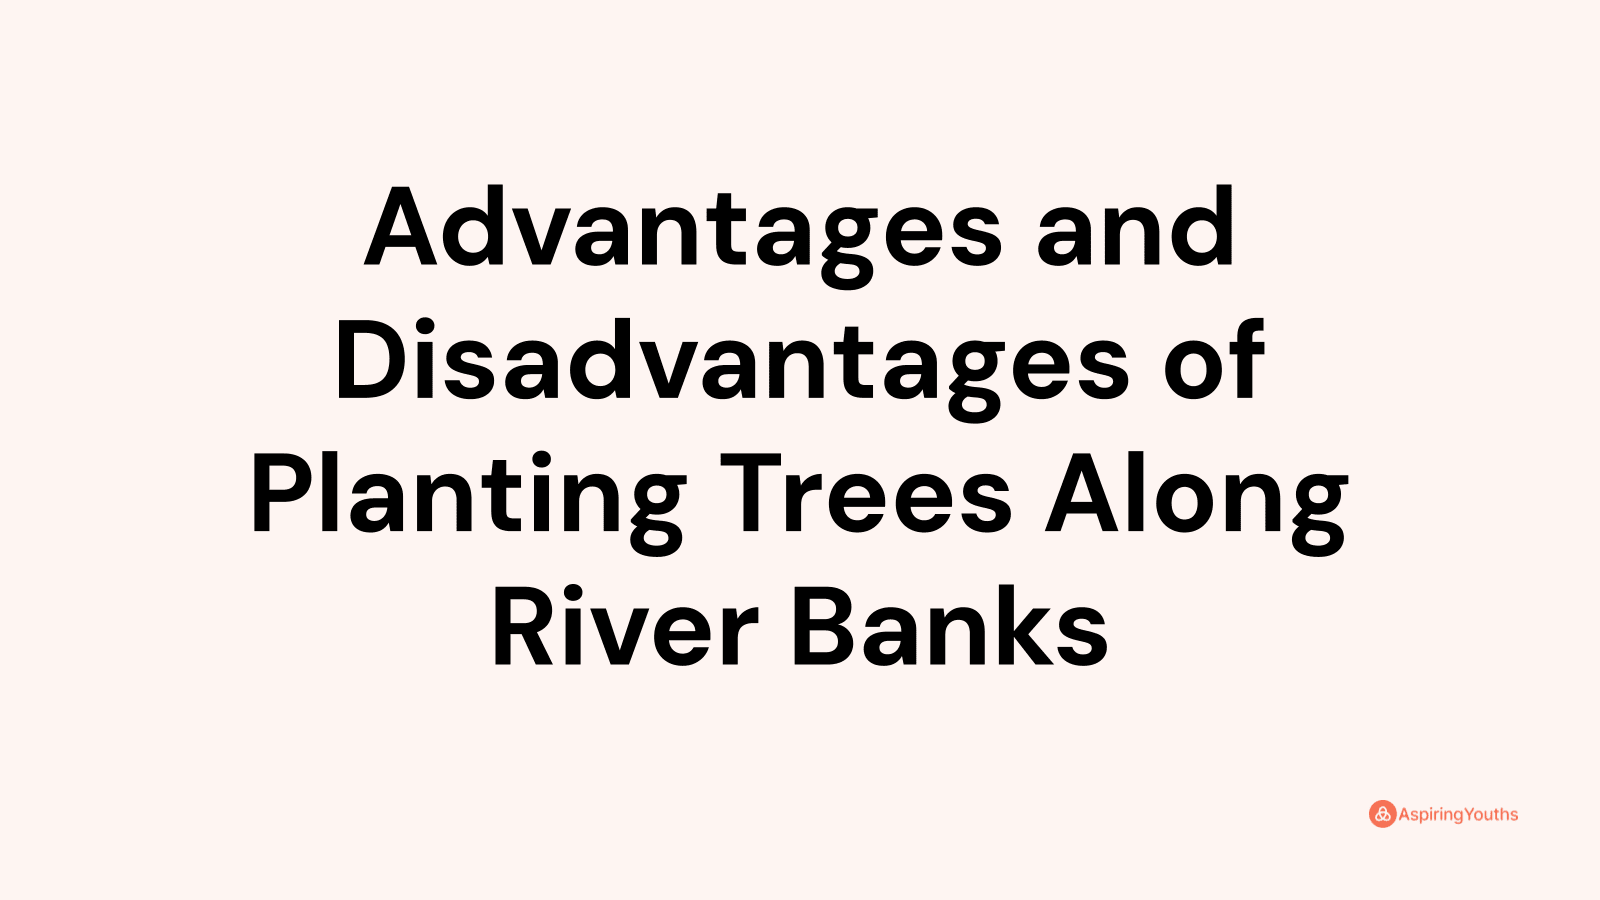 Advantages and disadvantages of Planting Trees Along River Banks